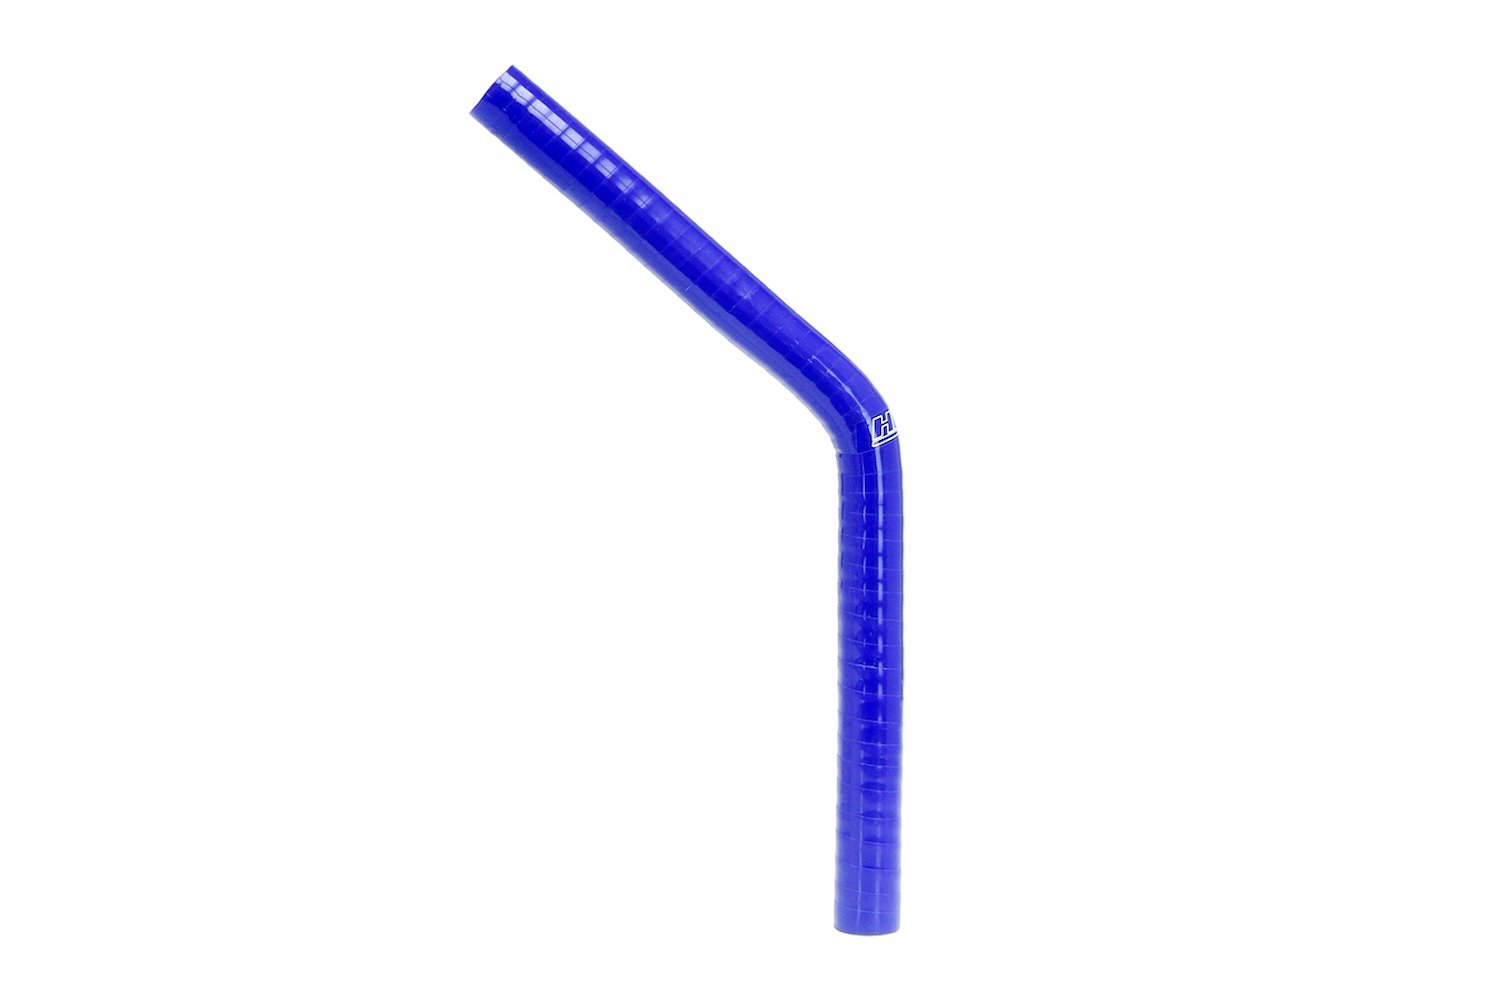 HTSEC45-162-BLUE Silicone 45-Degree Elbow Coupler Hose, High-Temp 4-Ply Reinforced, 1-5/8 in. ID, Blue